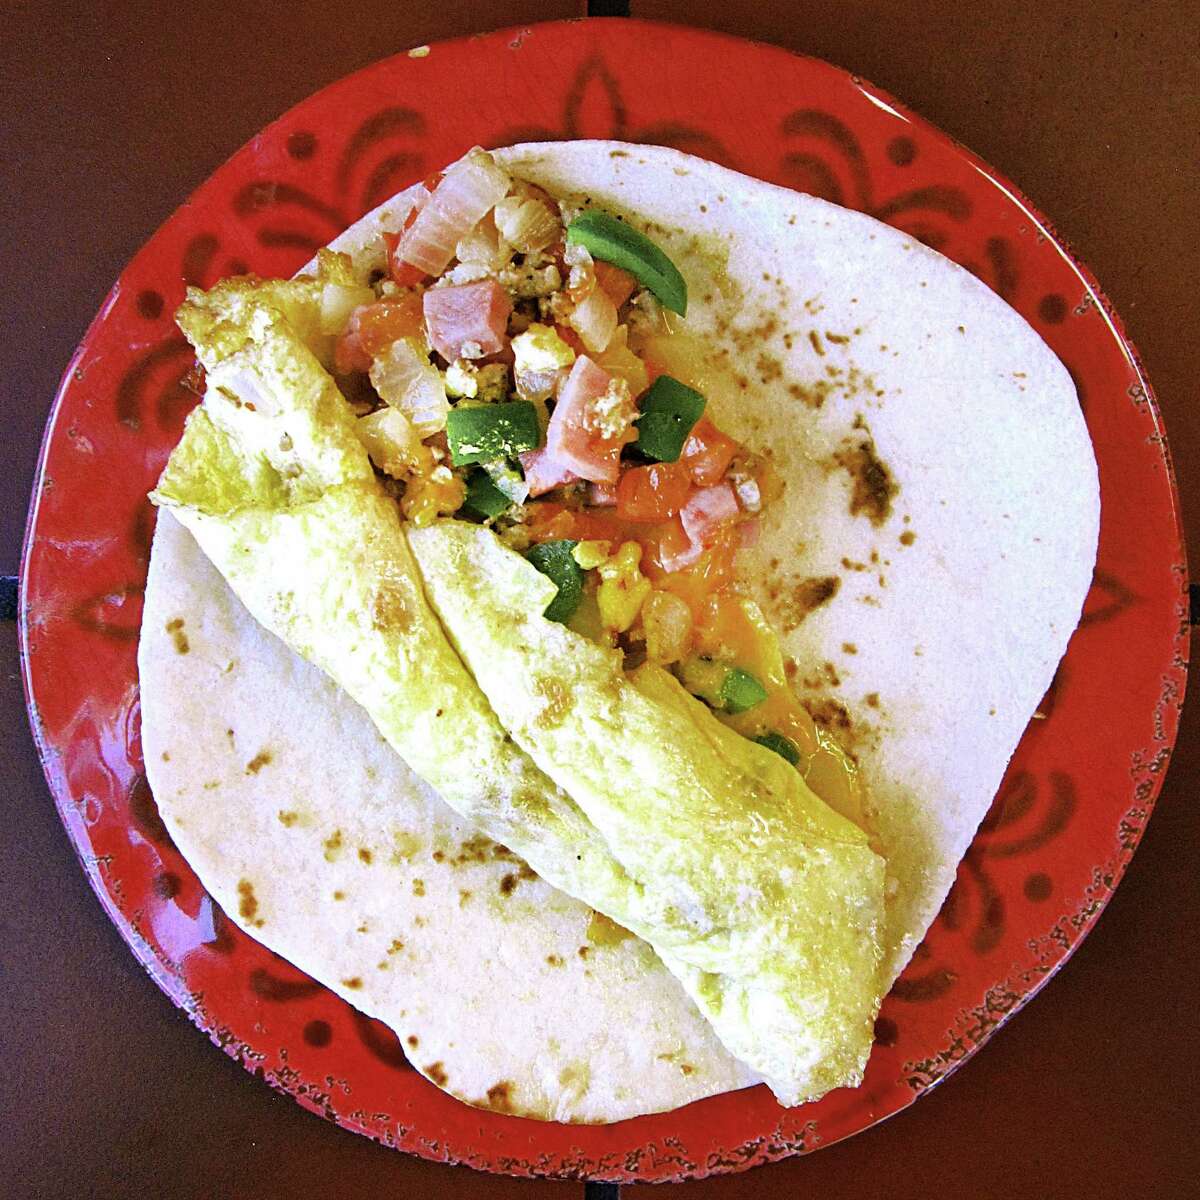 Taco of the Week: Omelet breakfast taco with eggs, ham, sausage, peppers, onions, tomatoes and cheese on a handmade flour tortilla from Ruthie's Mexican Restaurant.